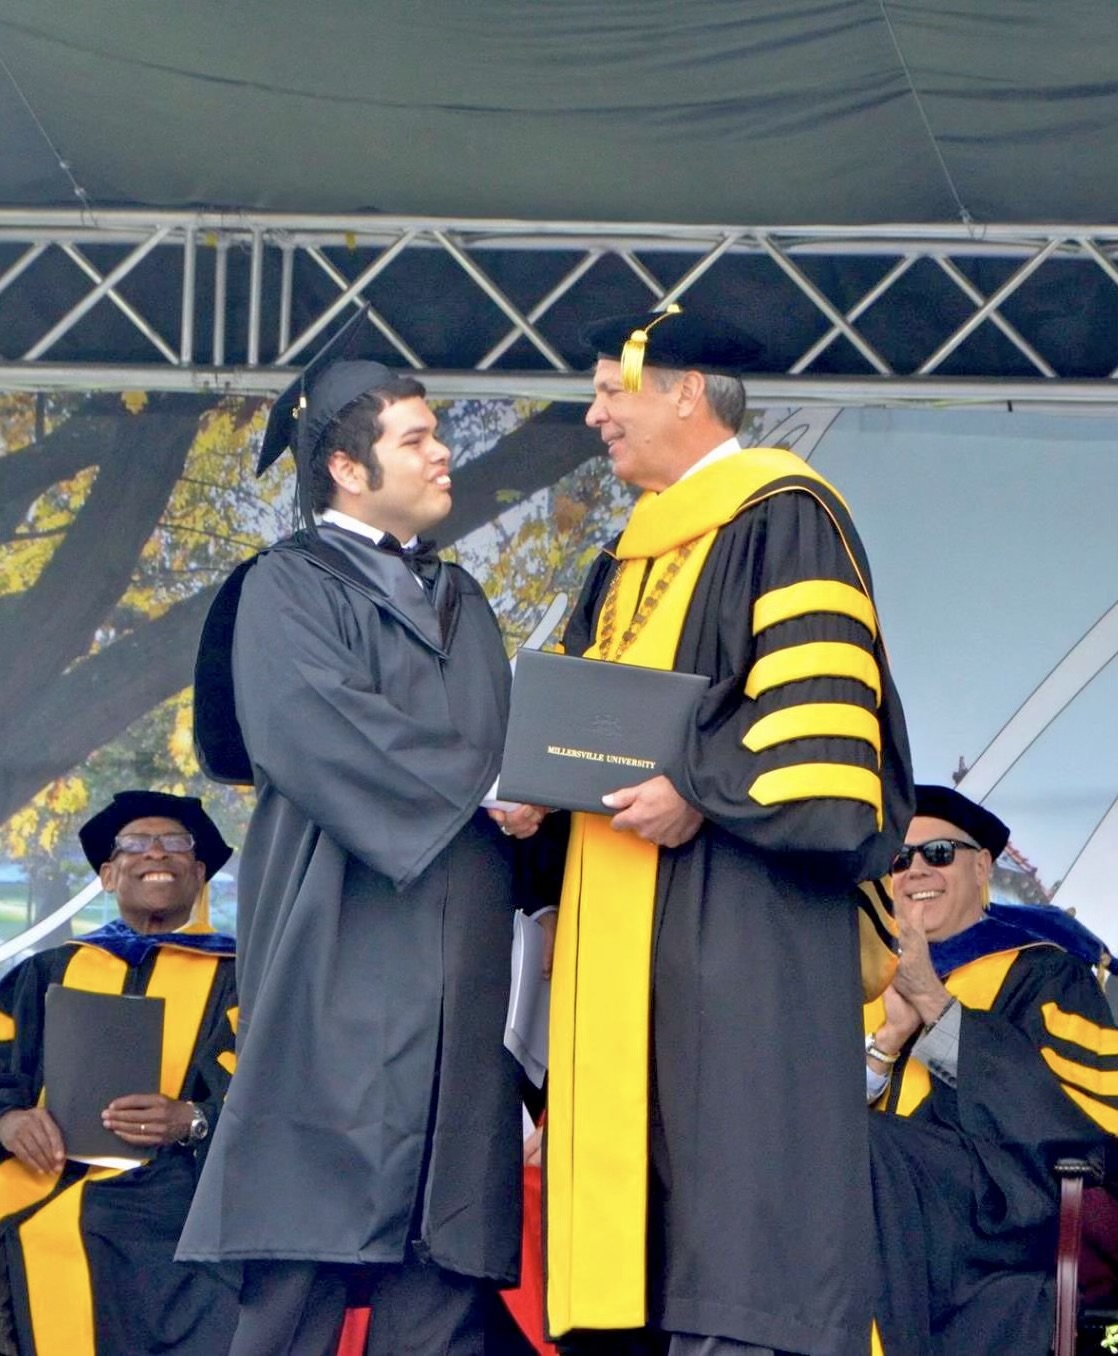 A student wearing black graduation regalia accepts his diploma while shaking hands with a university faculty member.